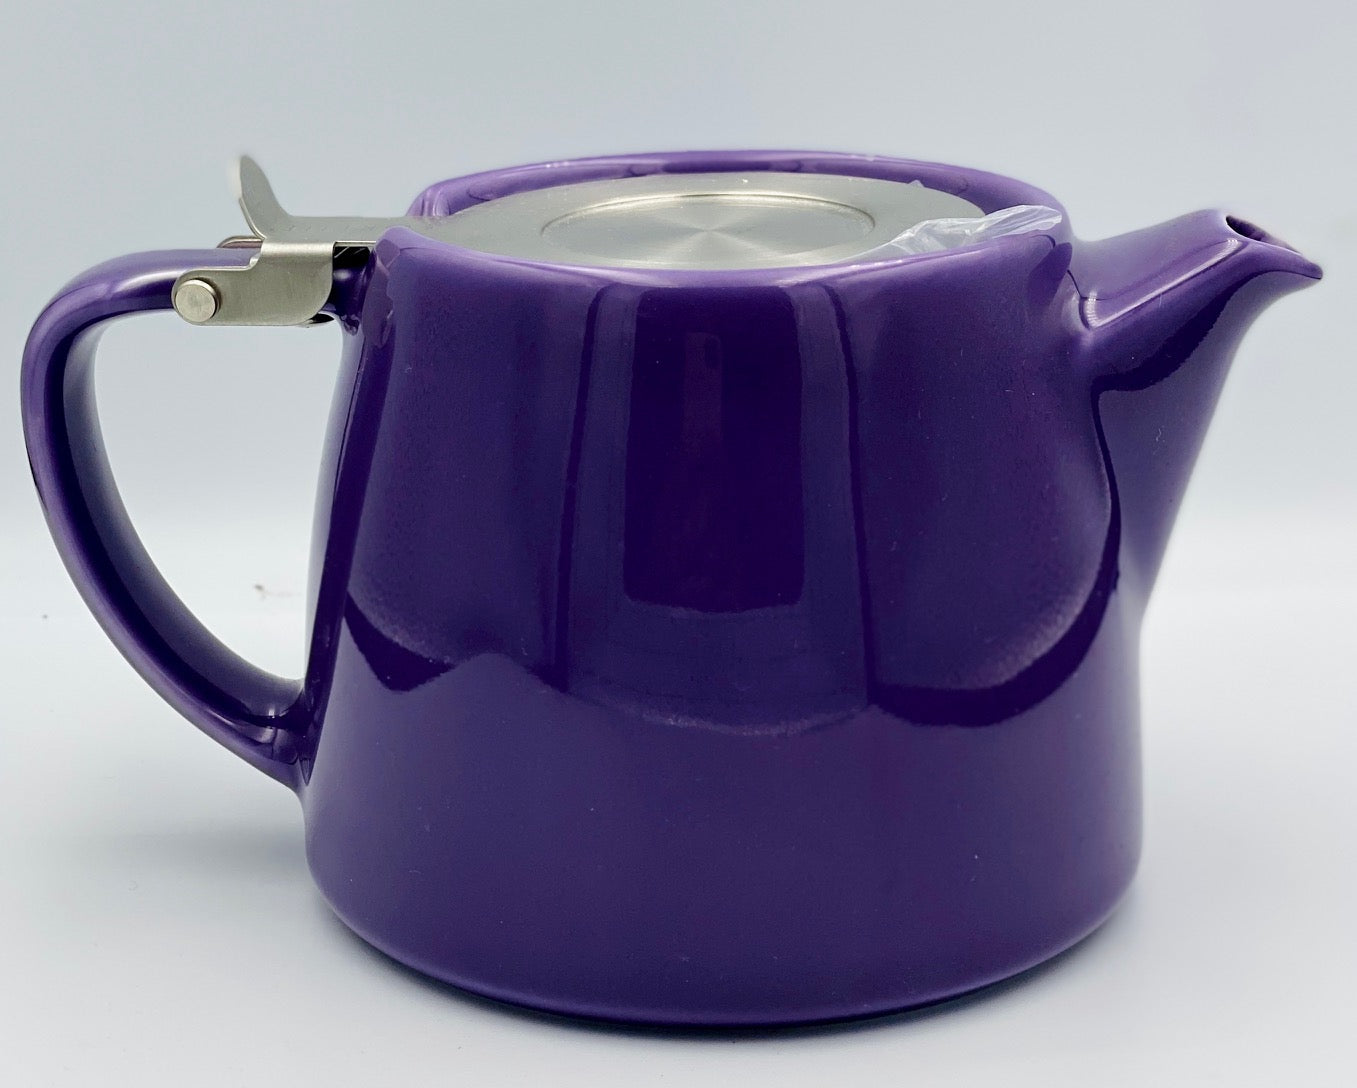 Stump Teapot with Lid and Removable Strainer